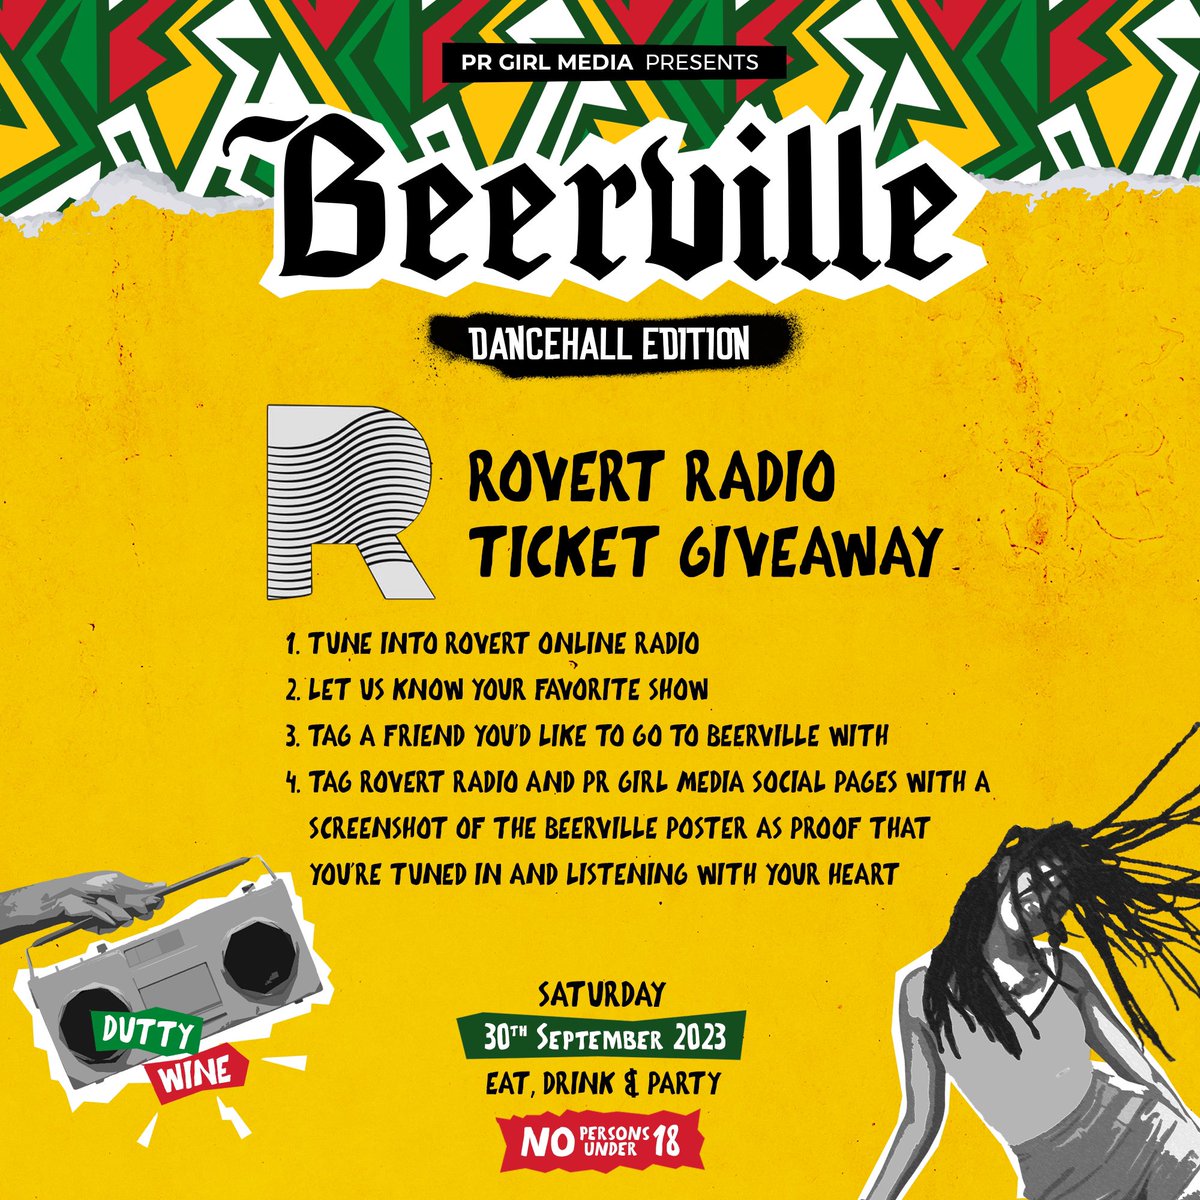 TODAY IS THE DAY!

There’s still time to win yourself free tickets to attend the 7th edition of the #Beerville 🙂courtesy of @PRGirlMedia & @RovertRadio!
See the poster for how to win & we’ll see you there ✨🎶
#Listenwithyourheart